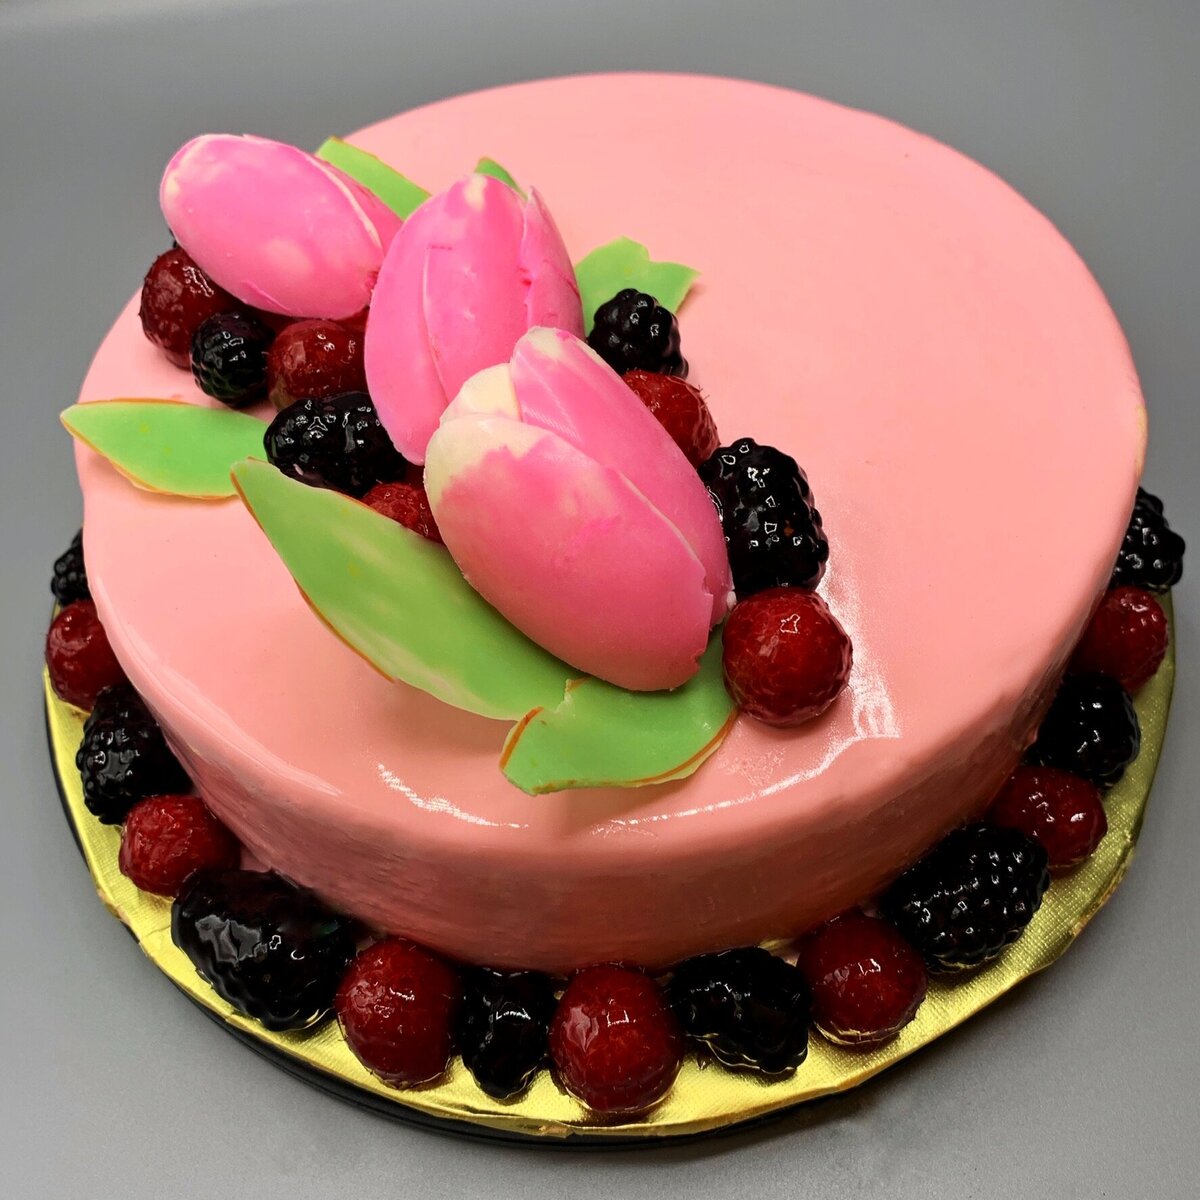 Blackberry mousse filled cake with  shiny pink glaze , fresh berries, and pink chocolate tulips